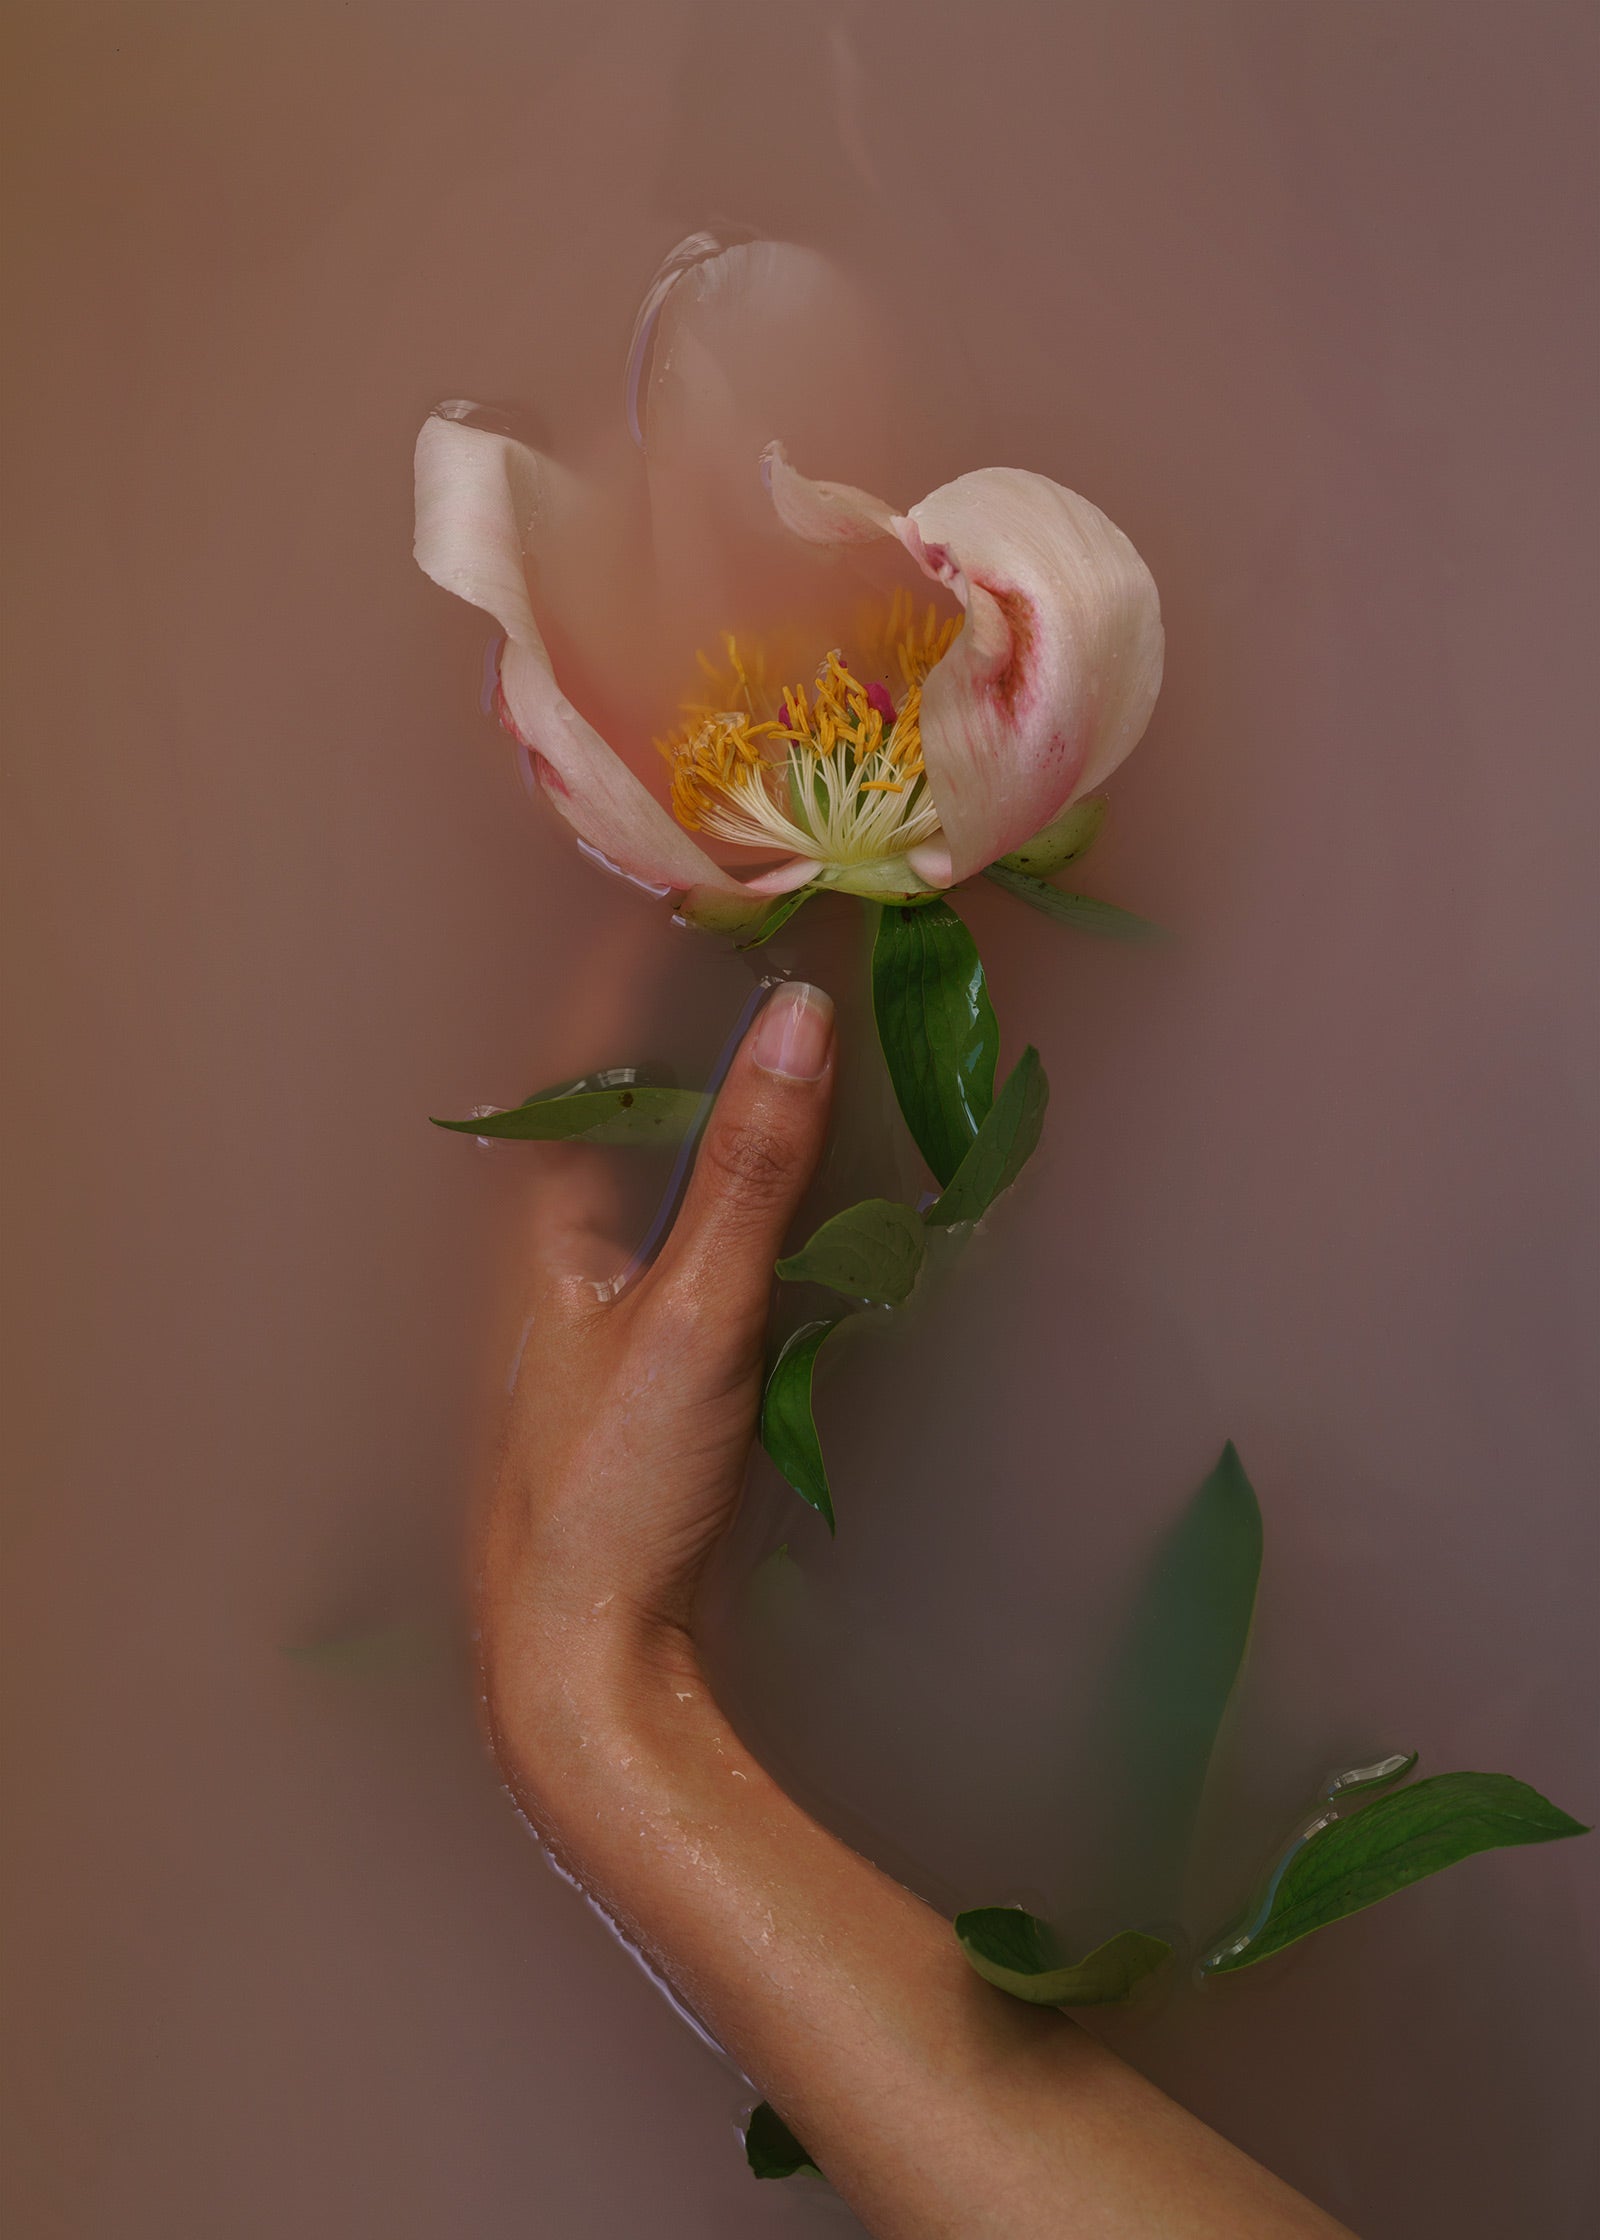 Image of hand in pink water holding a pink flower by Gabriela Silveira